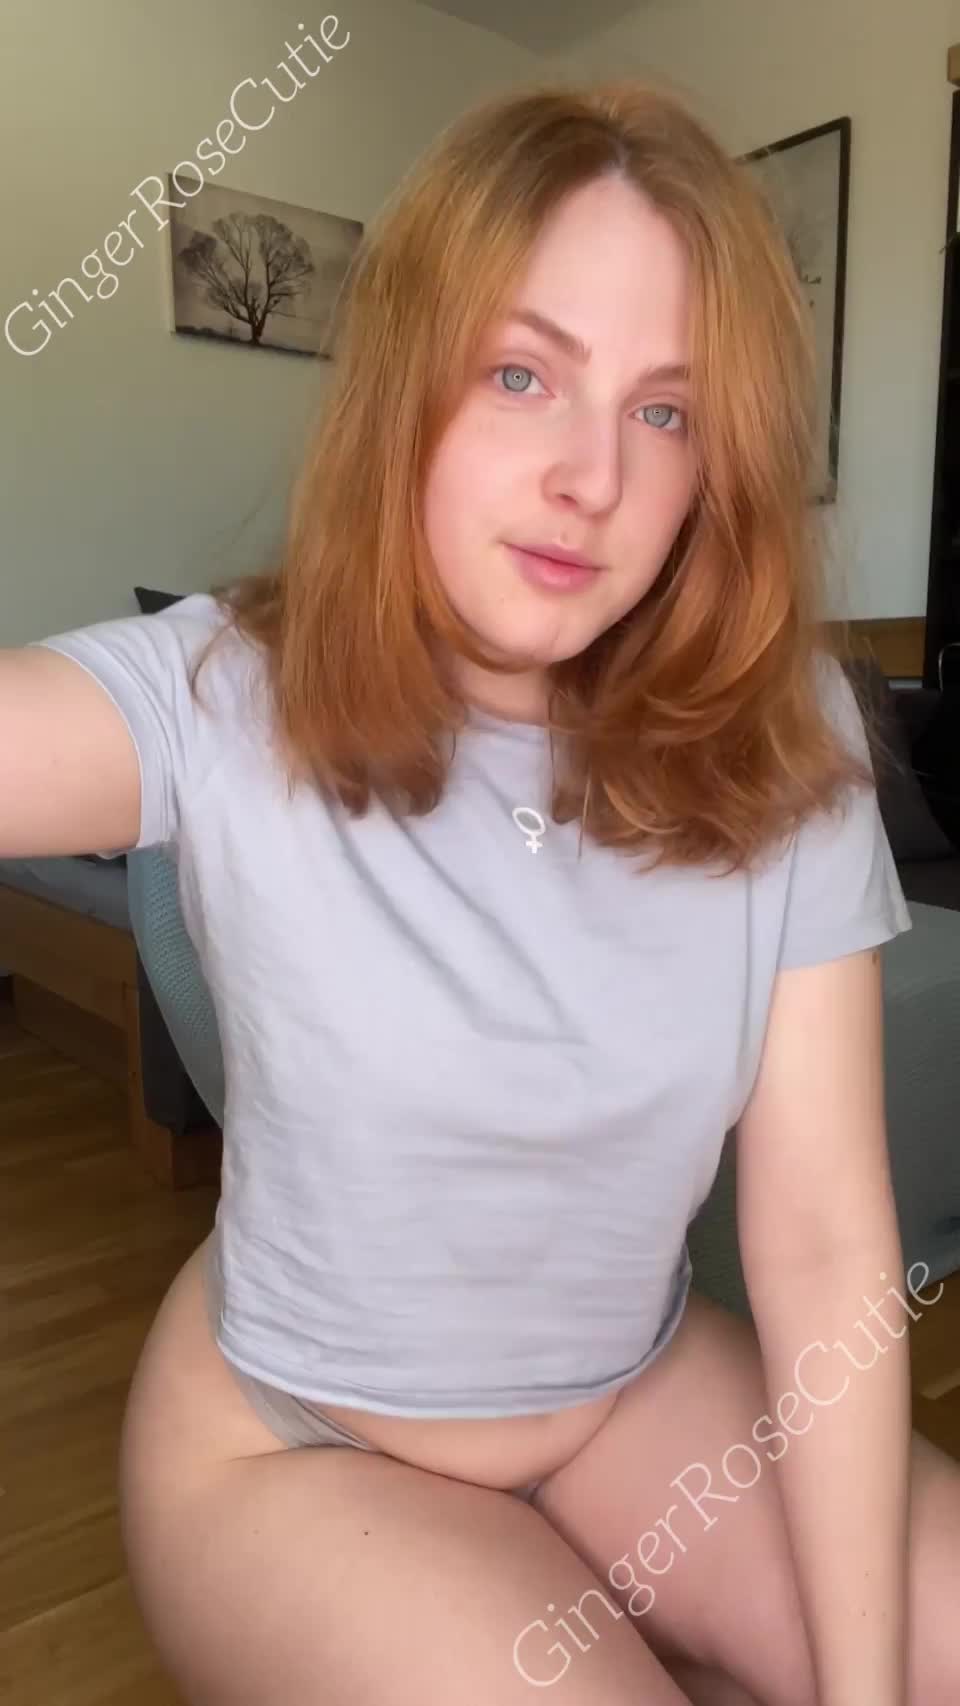 Showing you my pale body : video clip